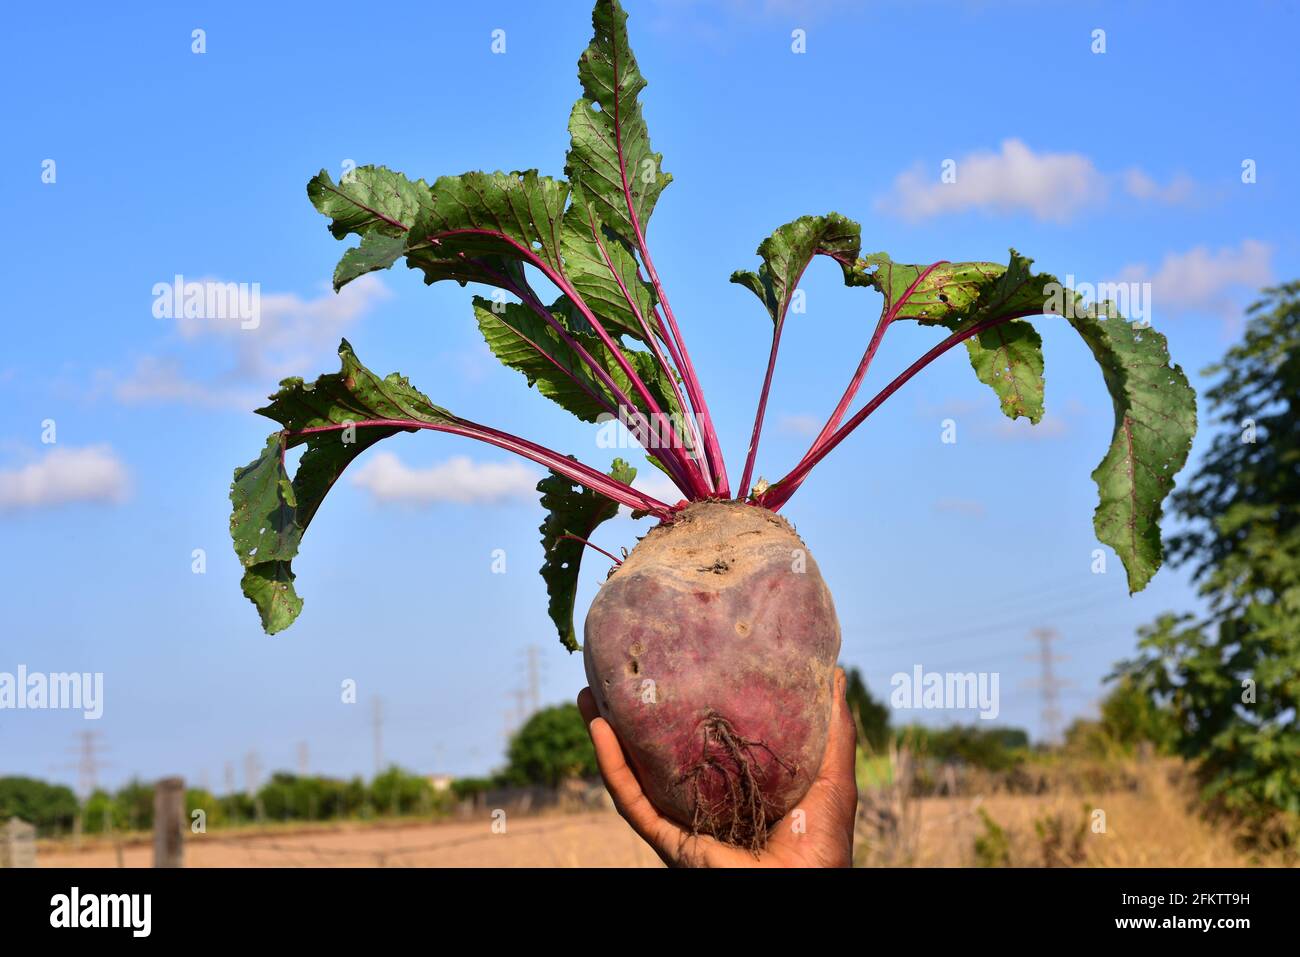 Beetroot (Beta vulgaris vulgaris) is an edible biennial plant native to Europe, northern Africa and western Asia. This photo was taken in Baix Stock Photo